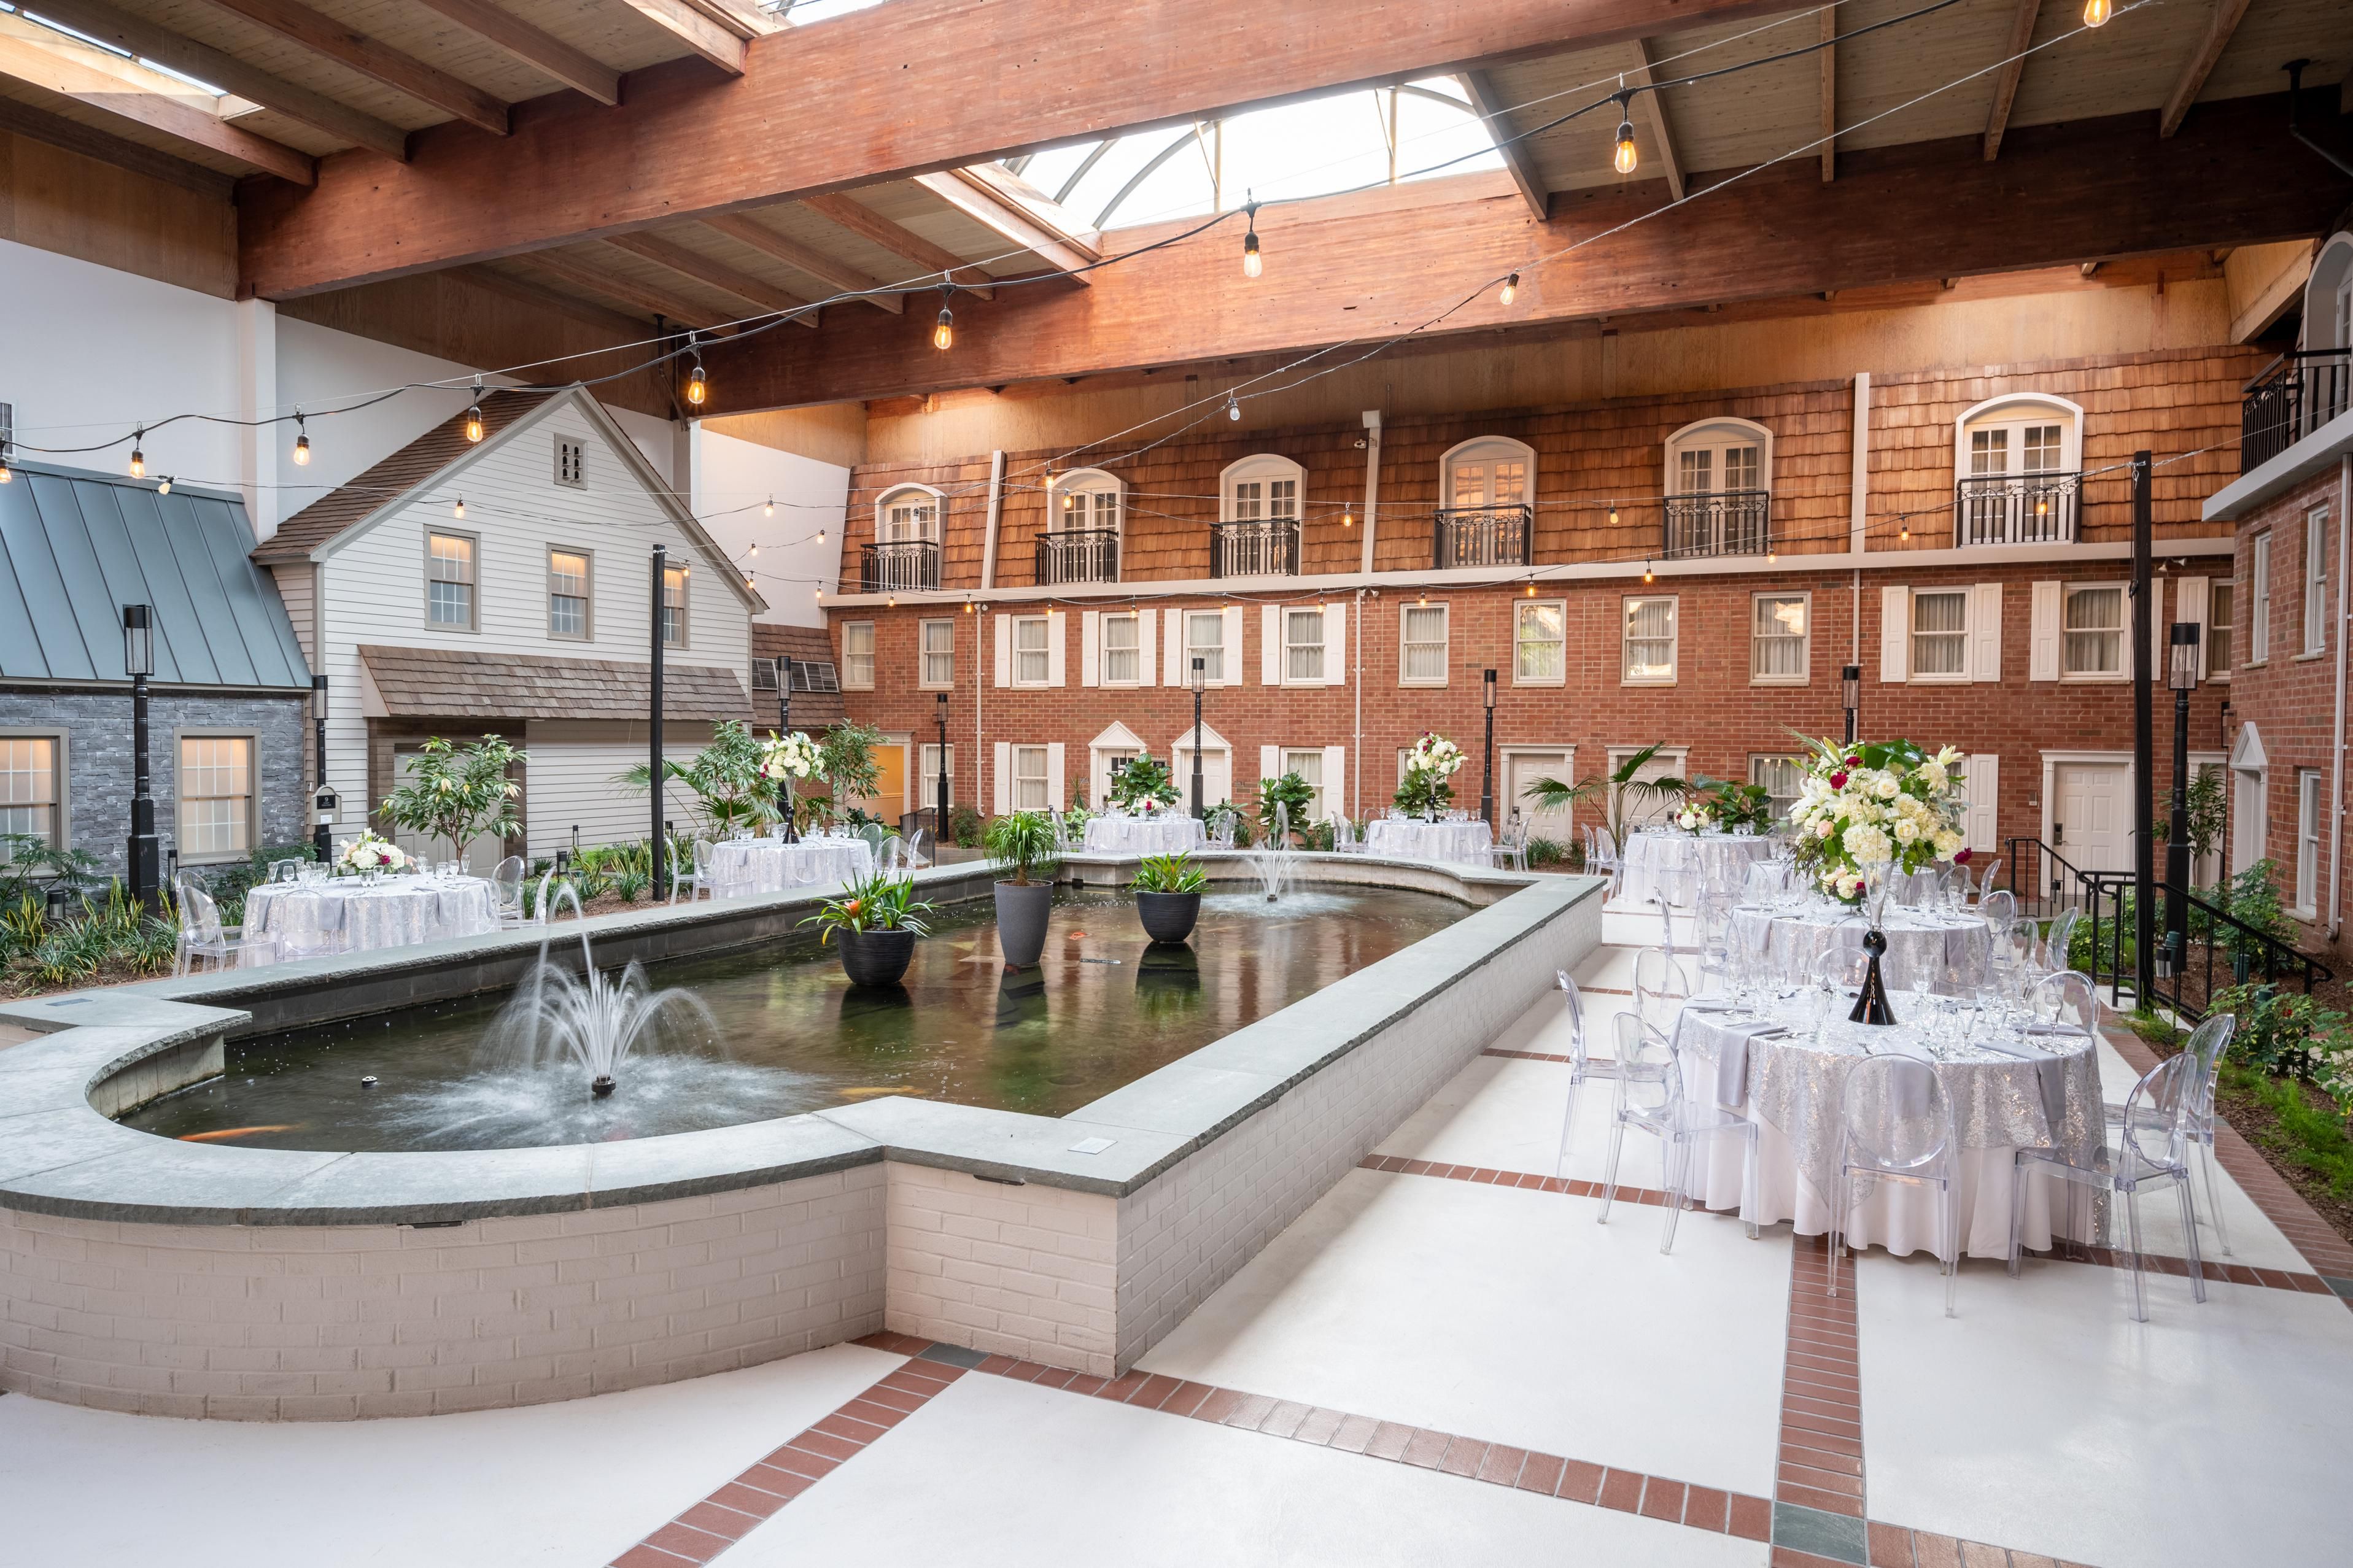 Host 200 guests around our beautiful indoor landscaped koi pond